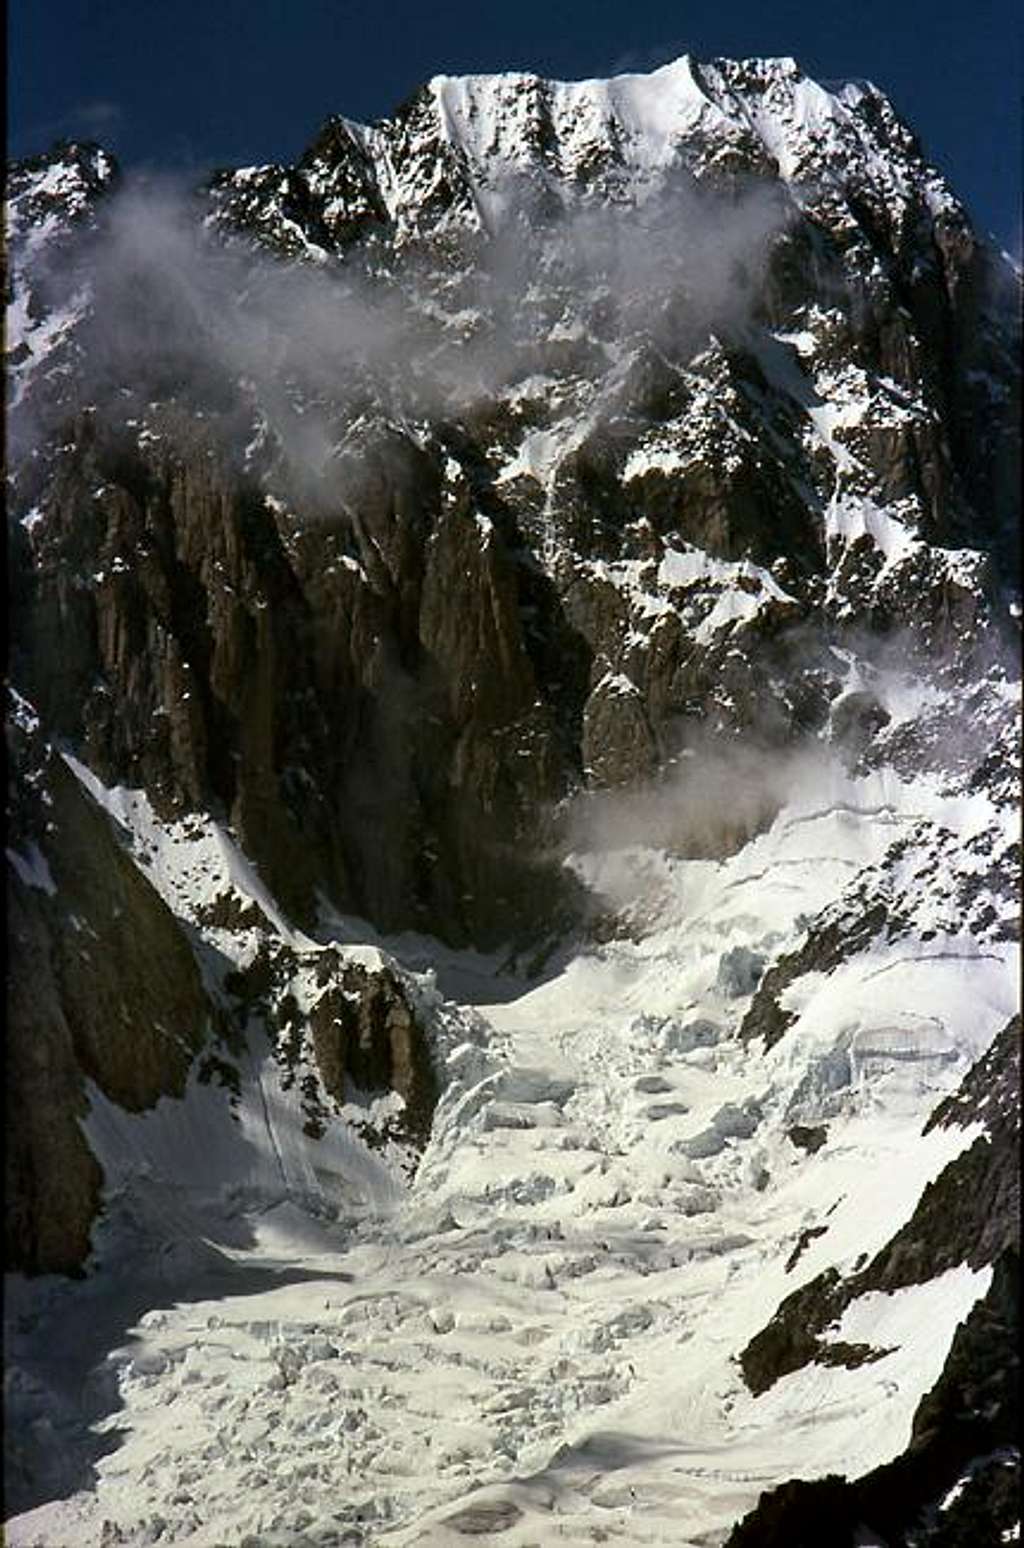 Mont Blanc di Courmayeur and Picco Luigi Amedeo on the left